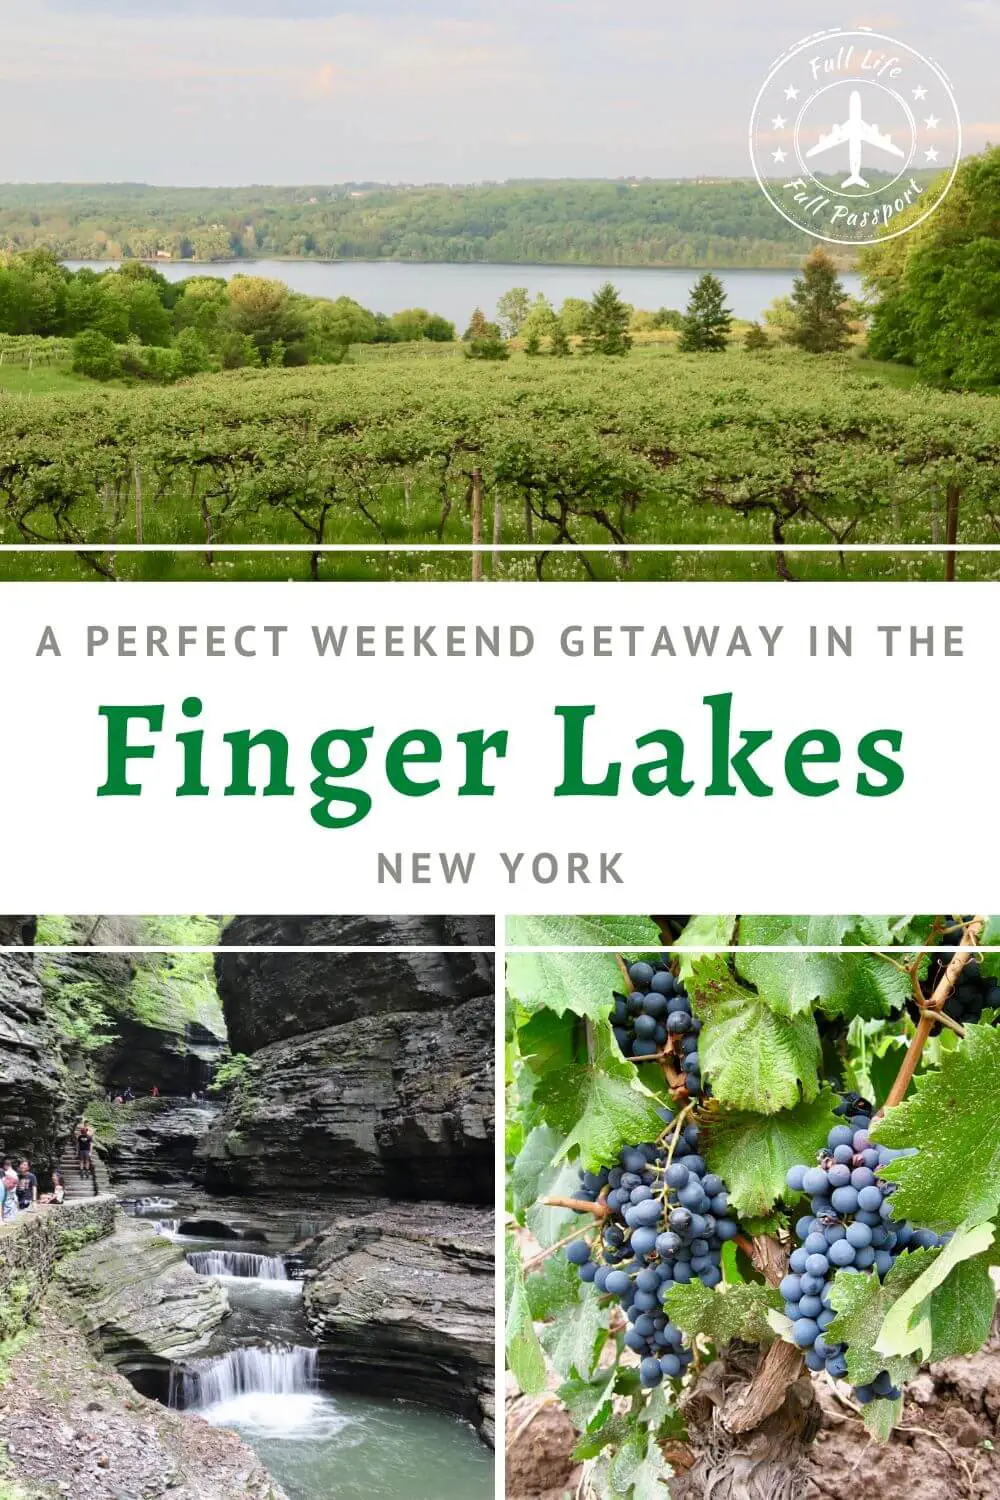 A Long Weekend Getaway in the Finger Lakes